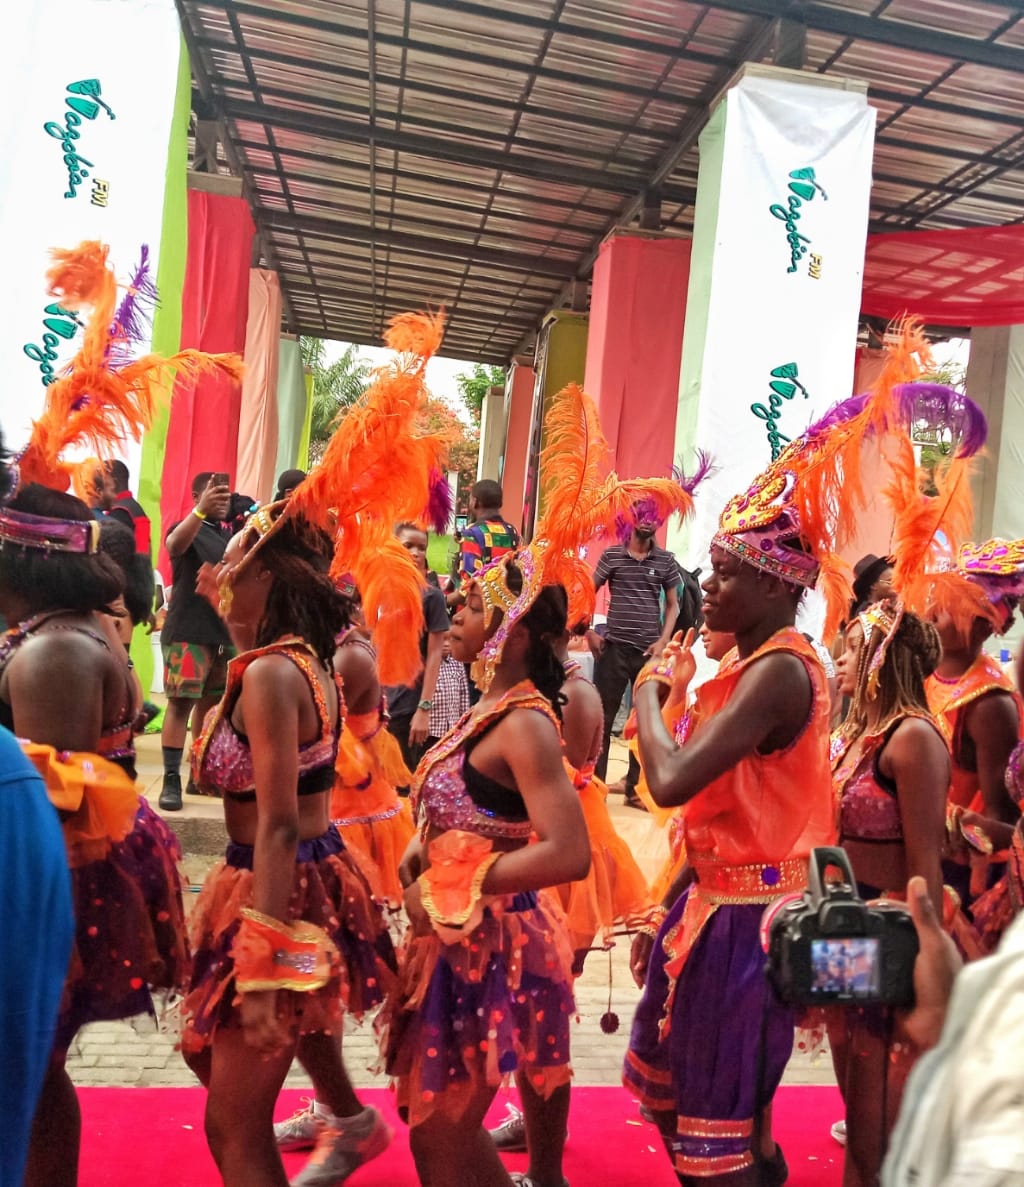 What is your Lagos story - Carnico Festival